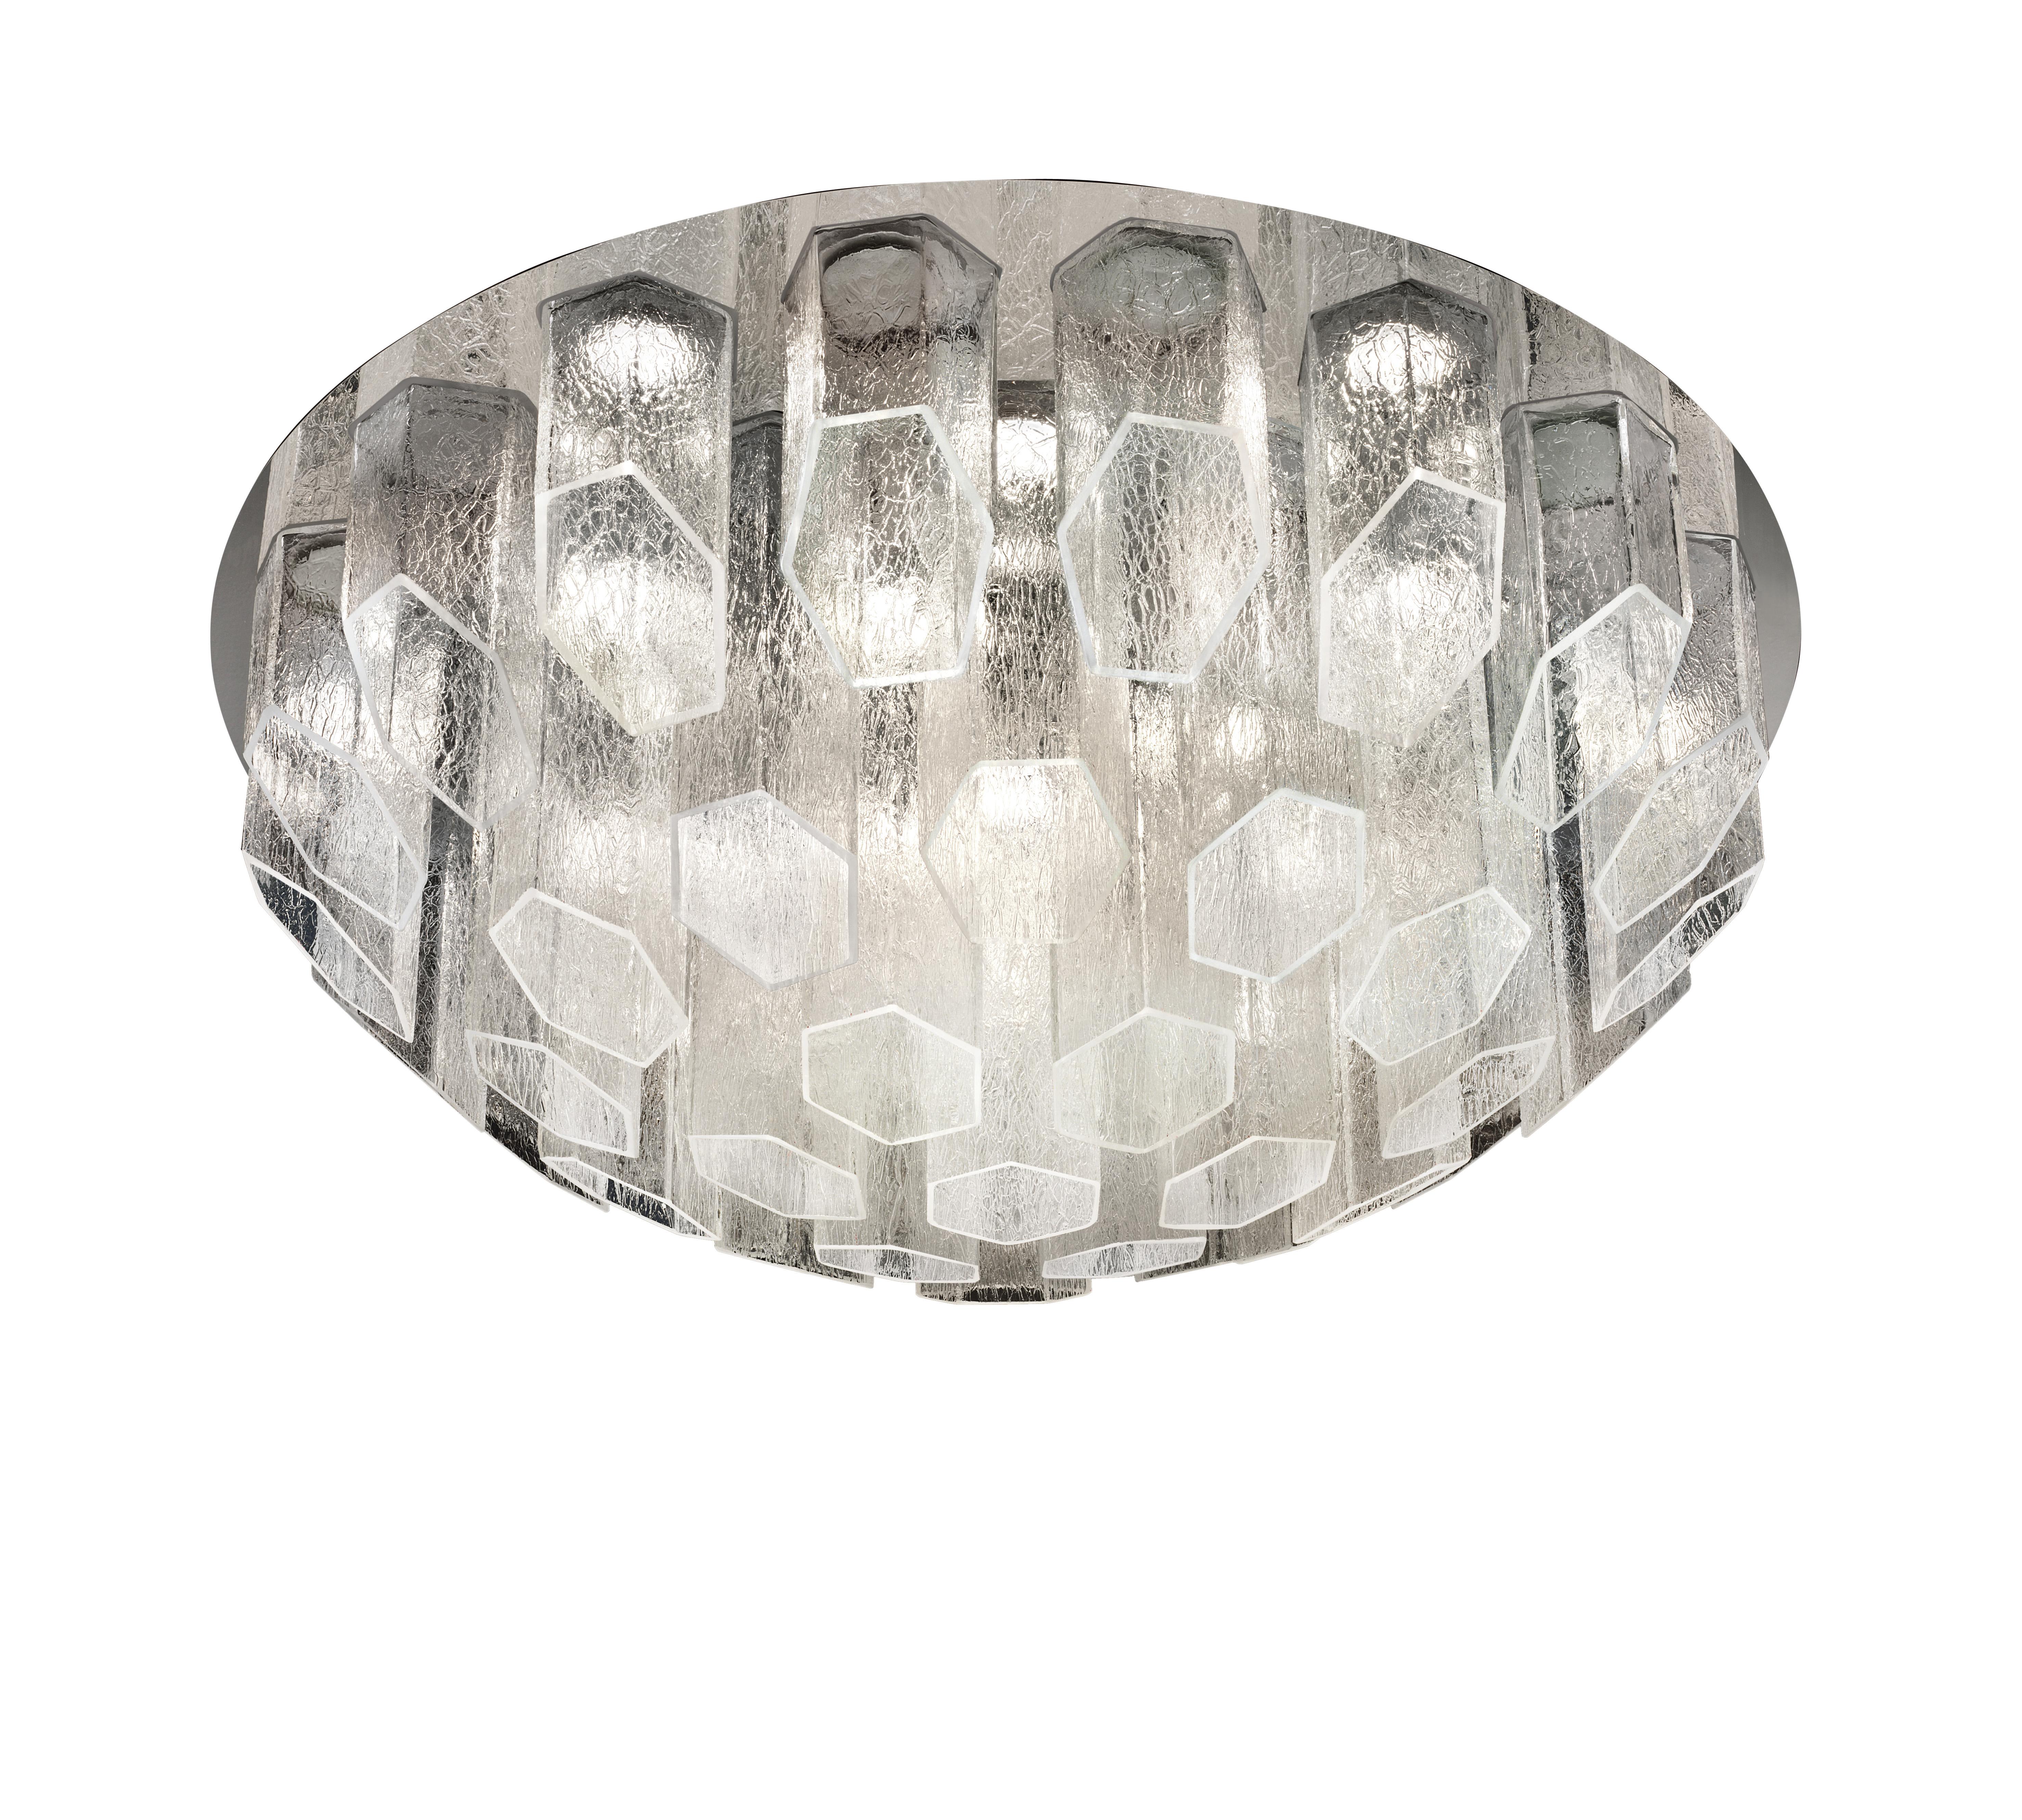 Italian Trim 7319 Ceiling Lamp in Glass with Polished Chrome Finish, by Barovier&Toso